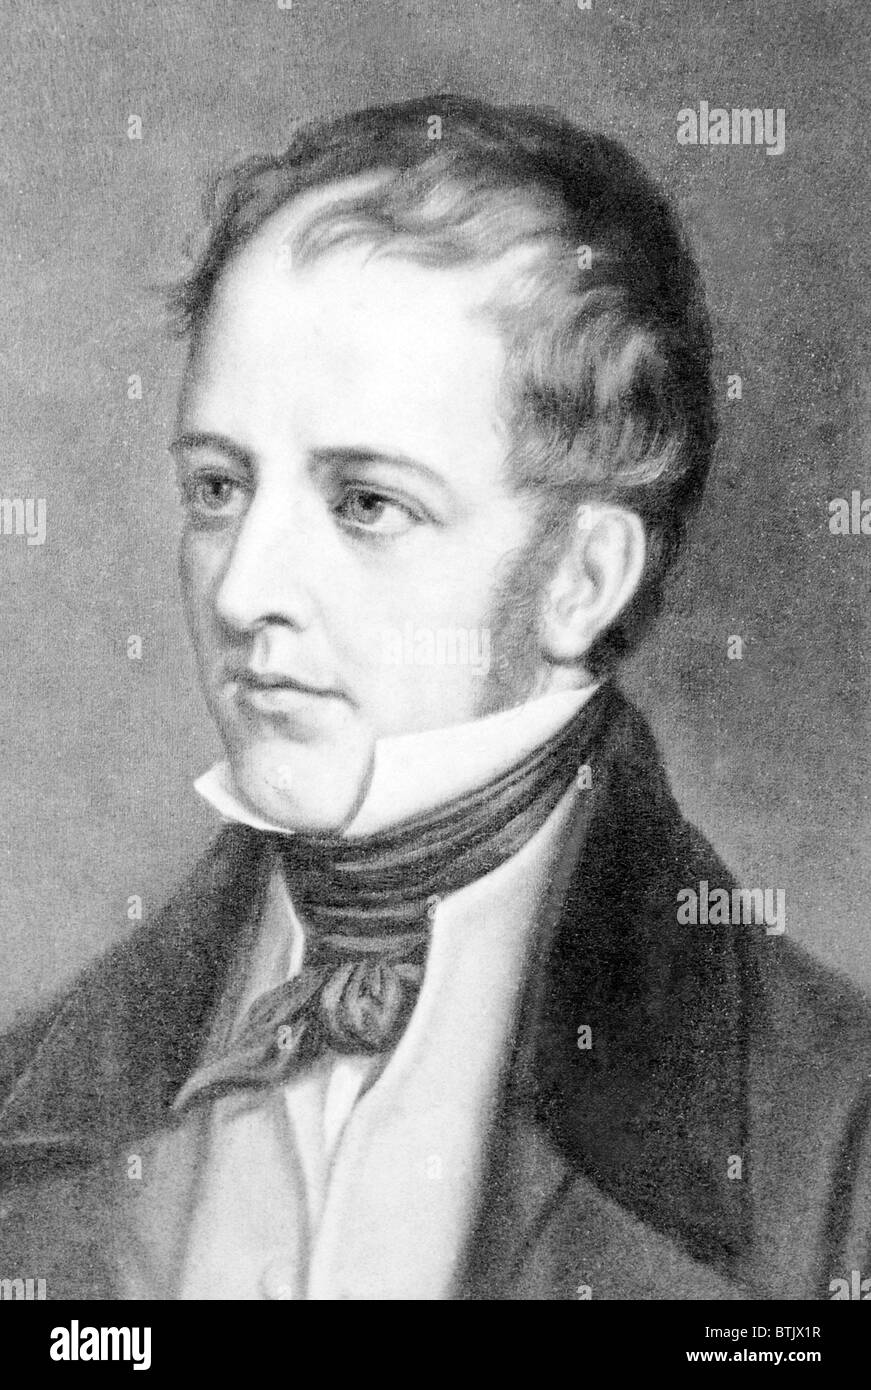 Frederick Marryat (1792-1848) English novelist of seafaring adventures, including 'The King's Own' (1830), 'Peter Simple' (1834), and 'Mr. Midshipman Easy' (1836). Stock Photo